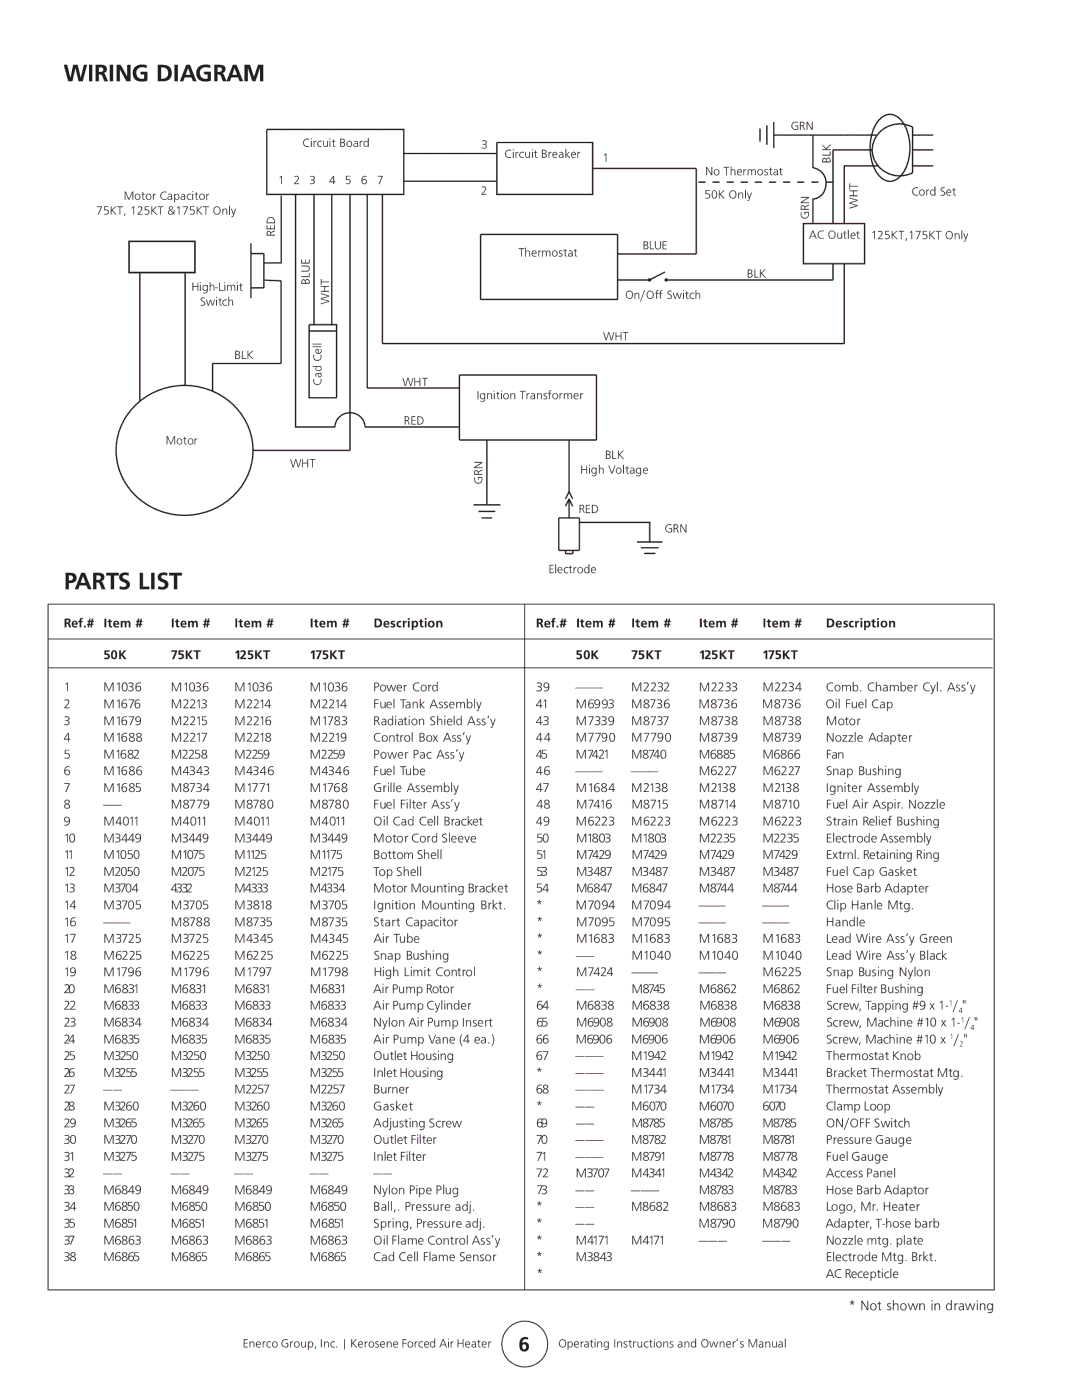 Enerco HS75KT, MH125KT, MH50KT, MH175KT, HS50KT, HS125KT, HS175KT, MH75KT manual Wiring Diagram, Parts List 